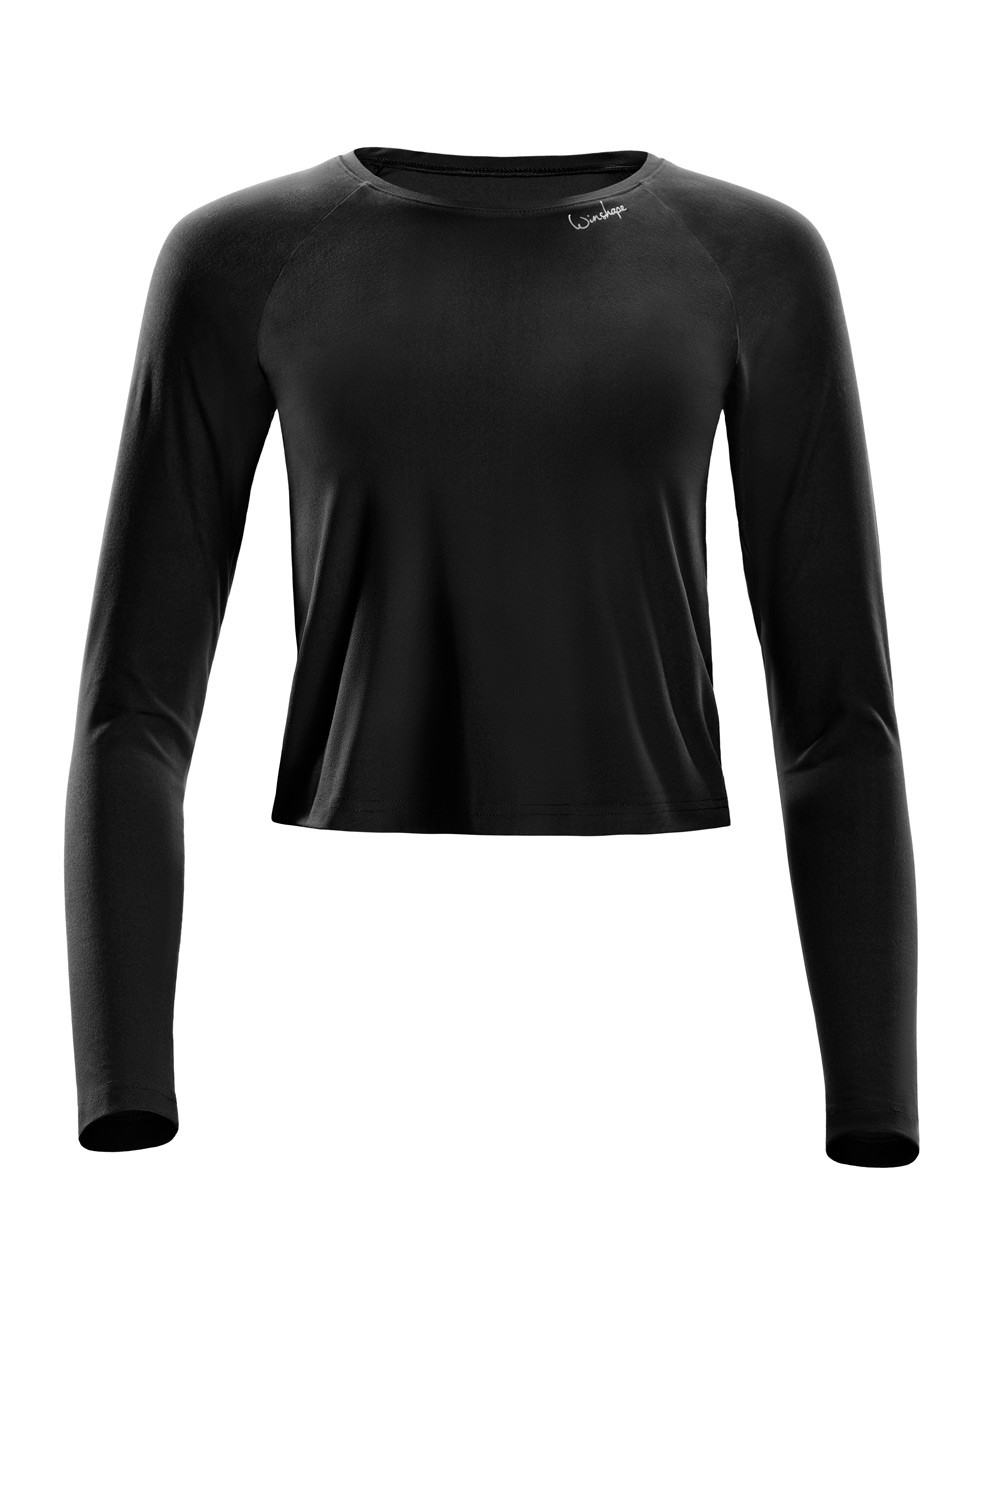 Functional Light and Soft Soft schwarz, Style Cropped Long Sleeve Ultra Winshape Top AET119LS